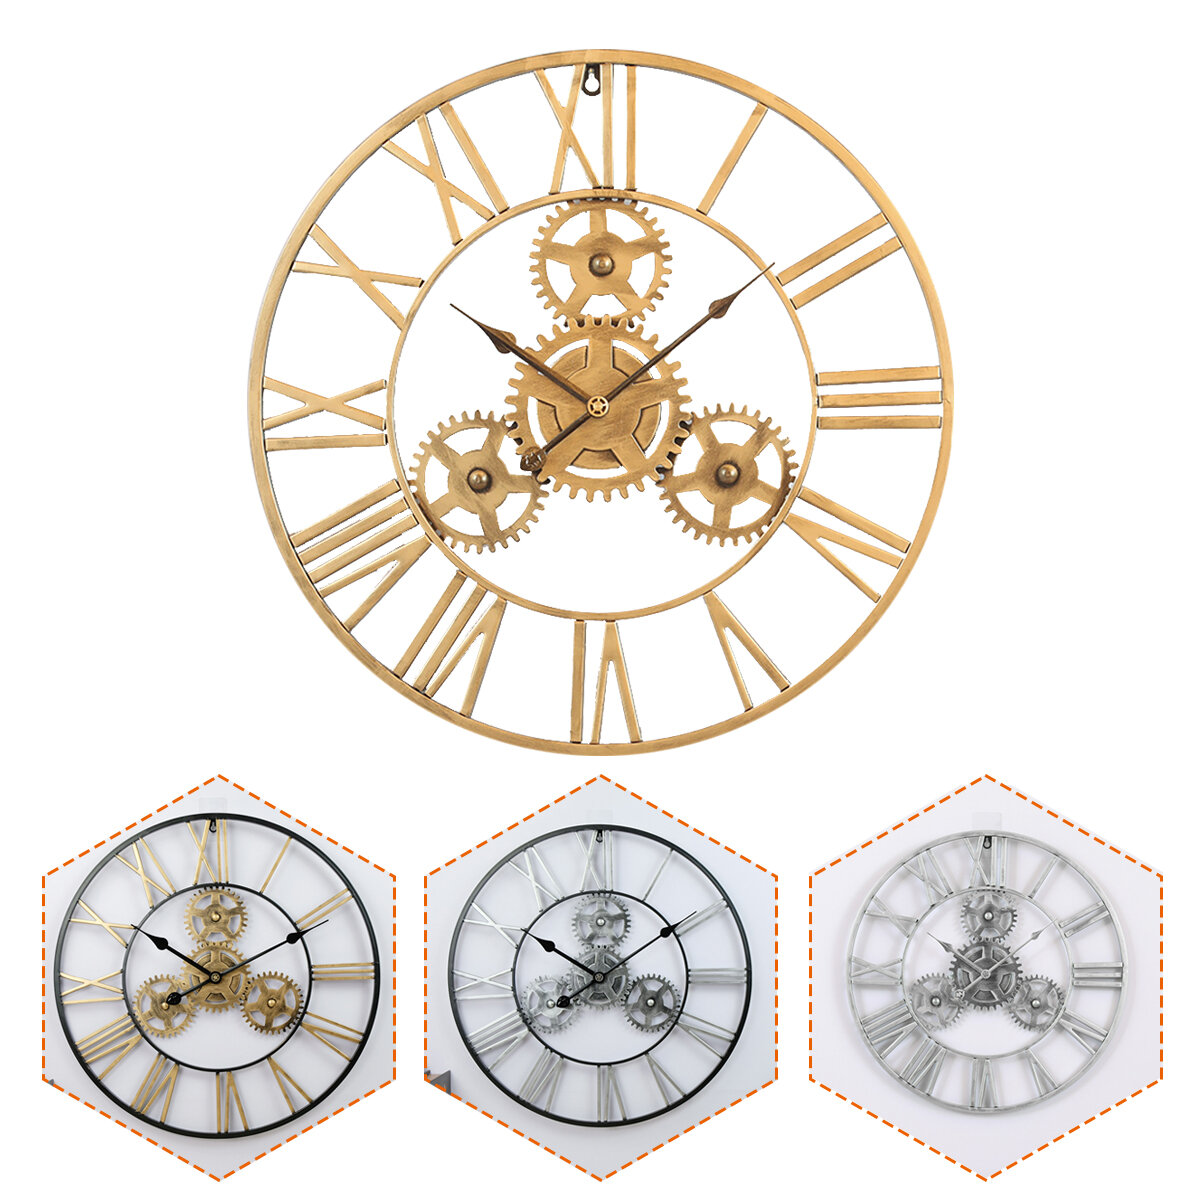 Image of 60CM Large Vintage Gear Art Wall Clock Big Roman Numeral Giant Round Open Face